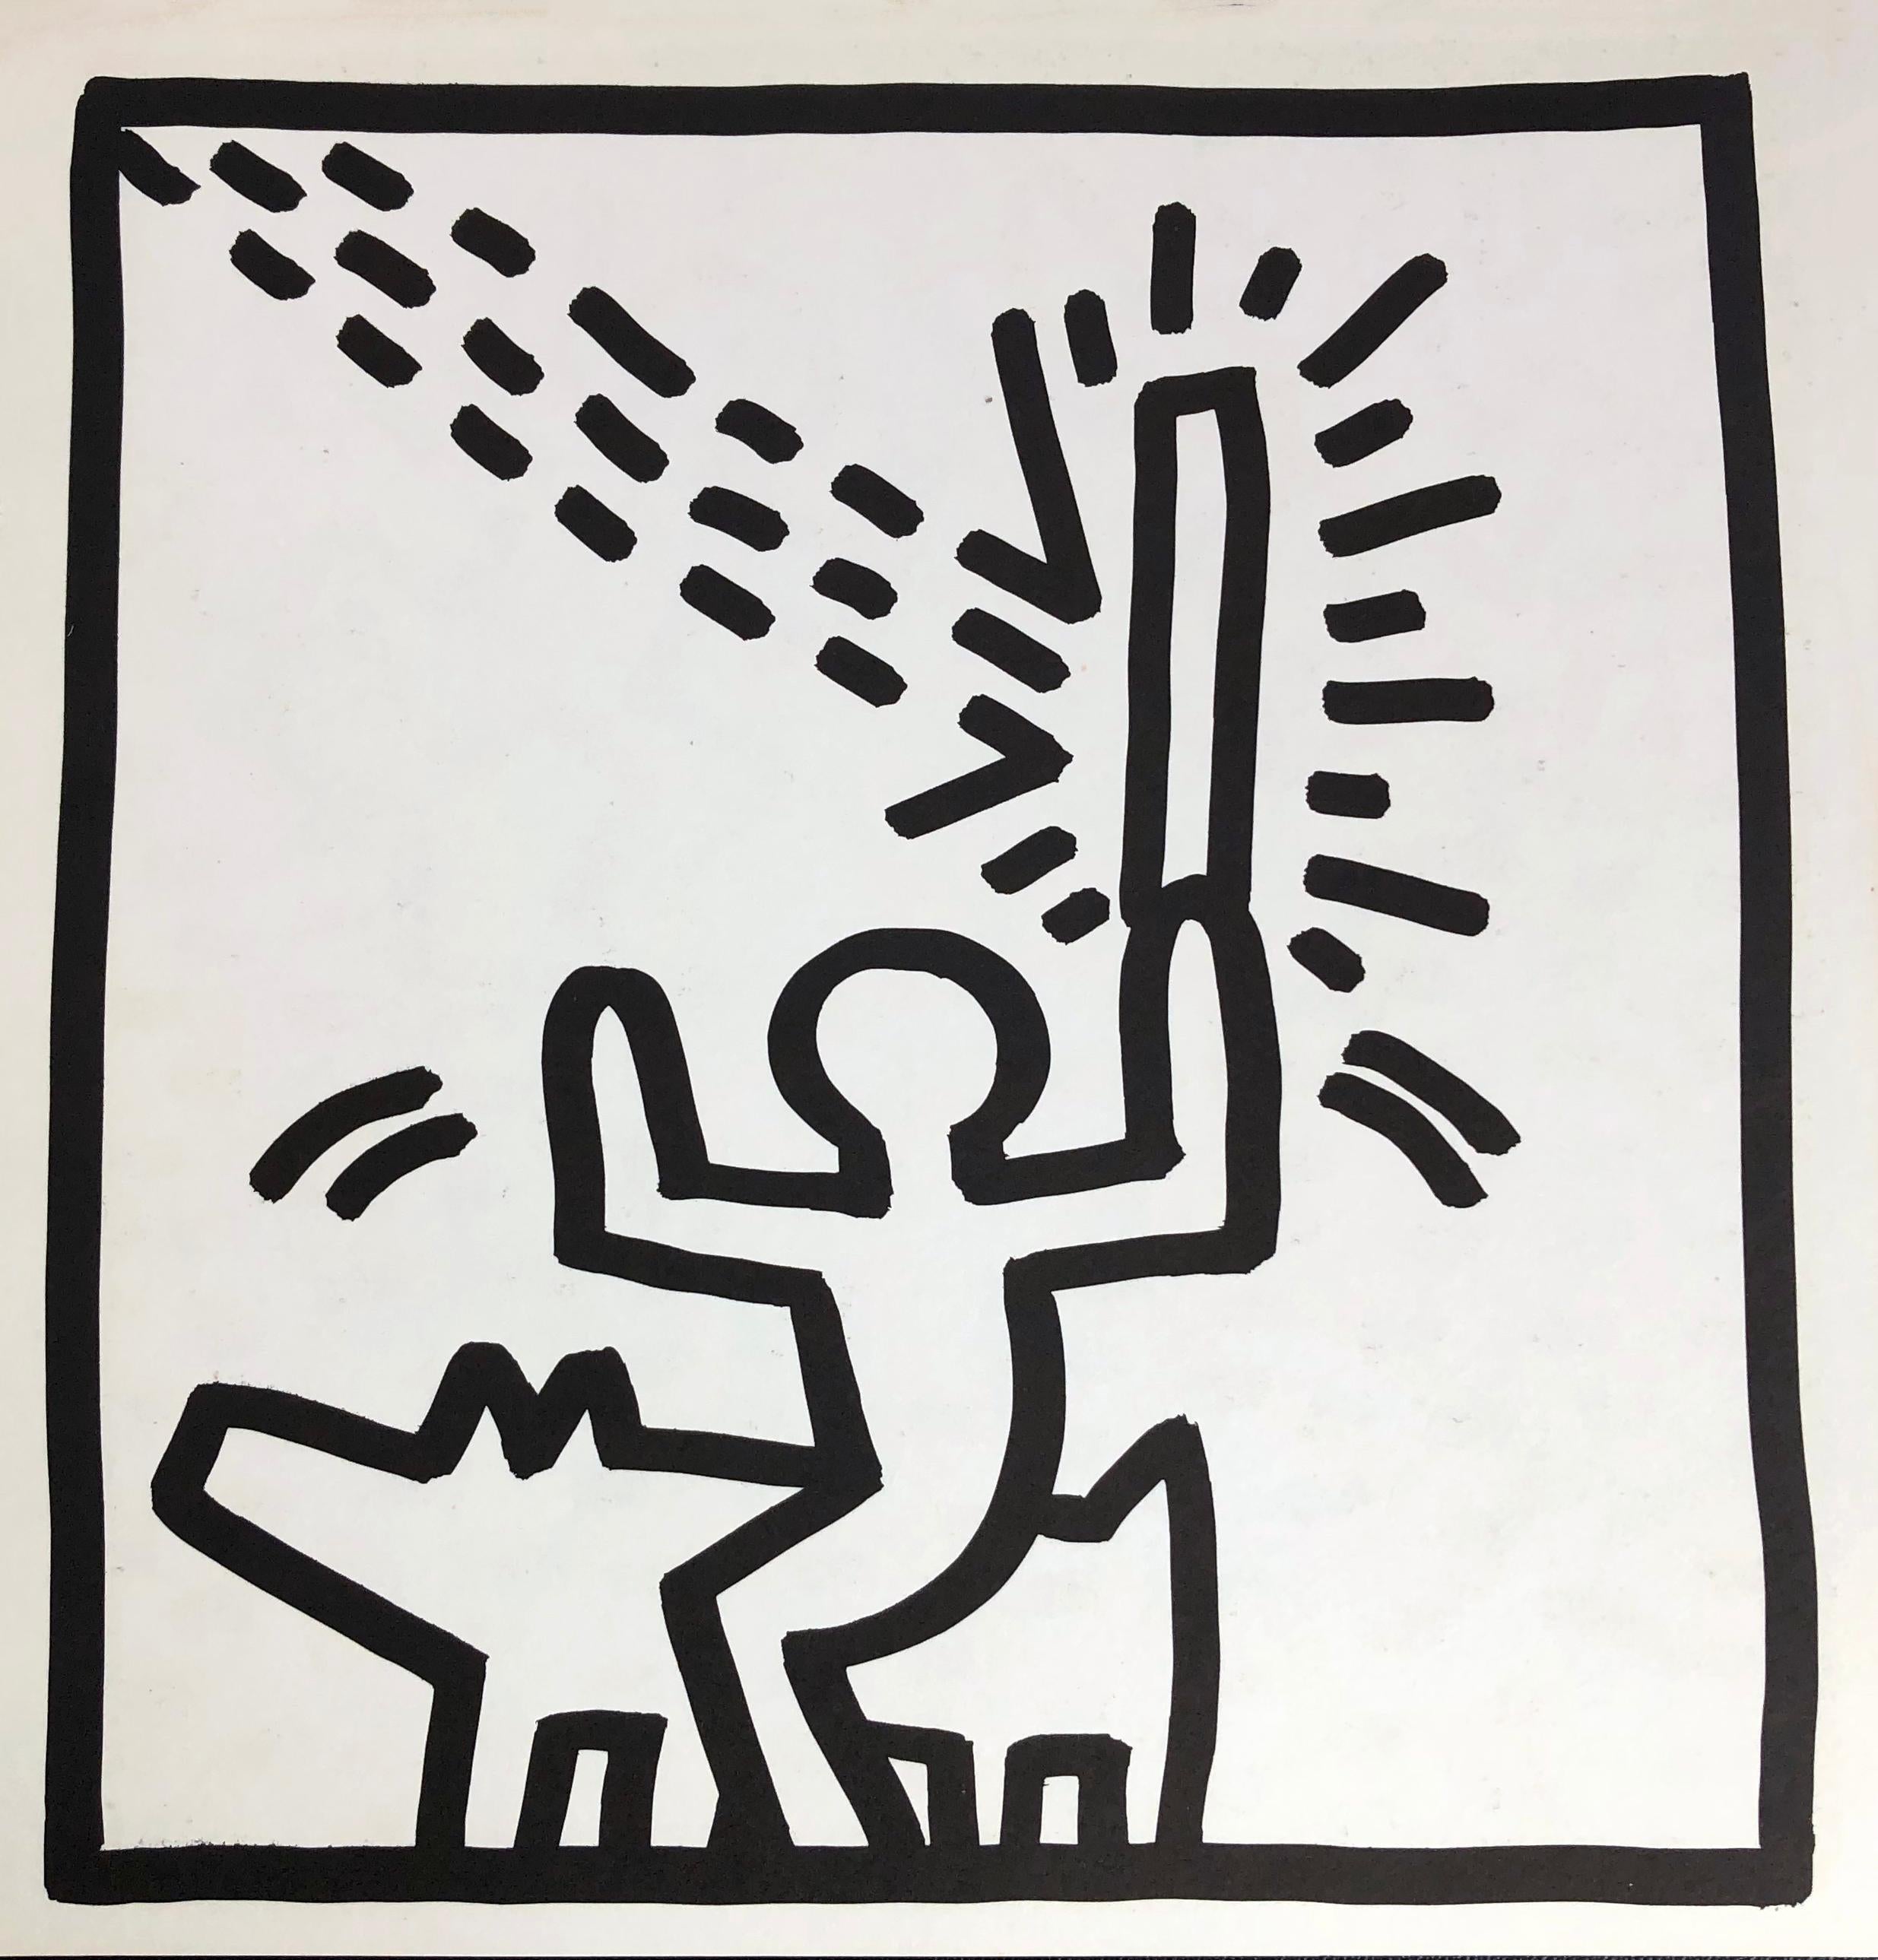 Keith Haring (untitled) Laser Beam lithograph 1982
Double-sided offset lithograph published by Tony Shafrazi Gallery, New York, 1982 from an edition of 2000. 

Single sheet lithograph from the seminal spiral bound, early monograph showcasing